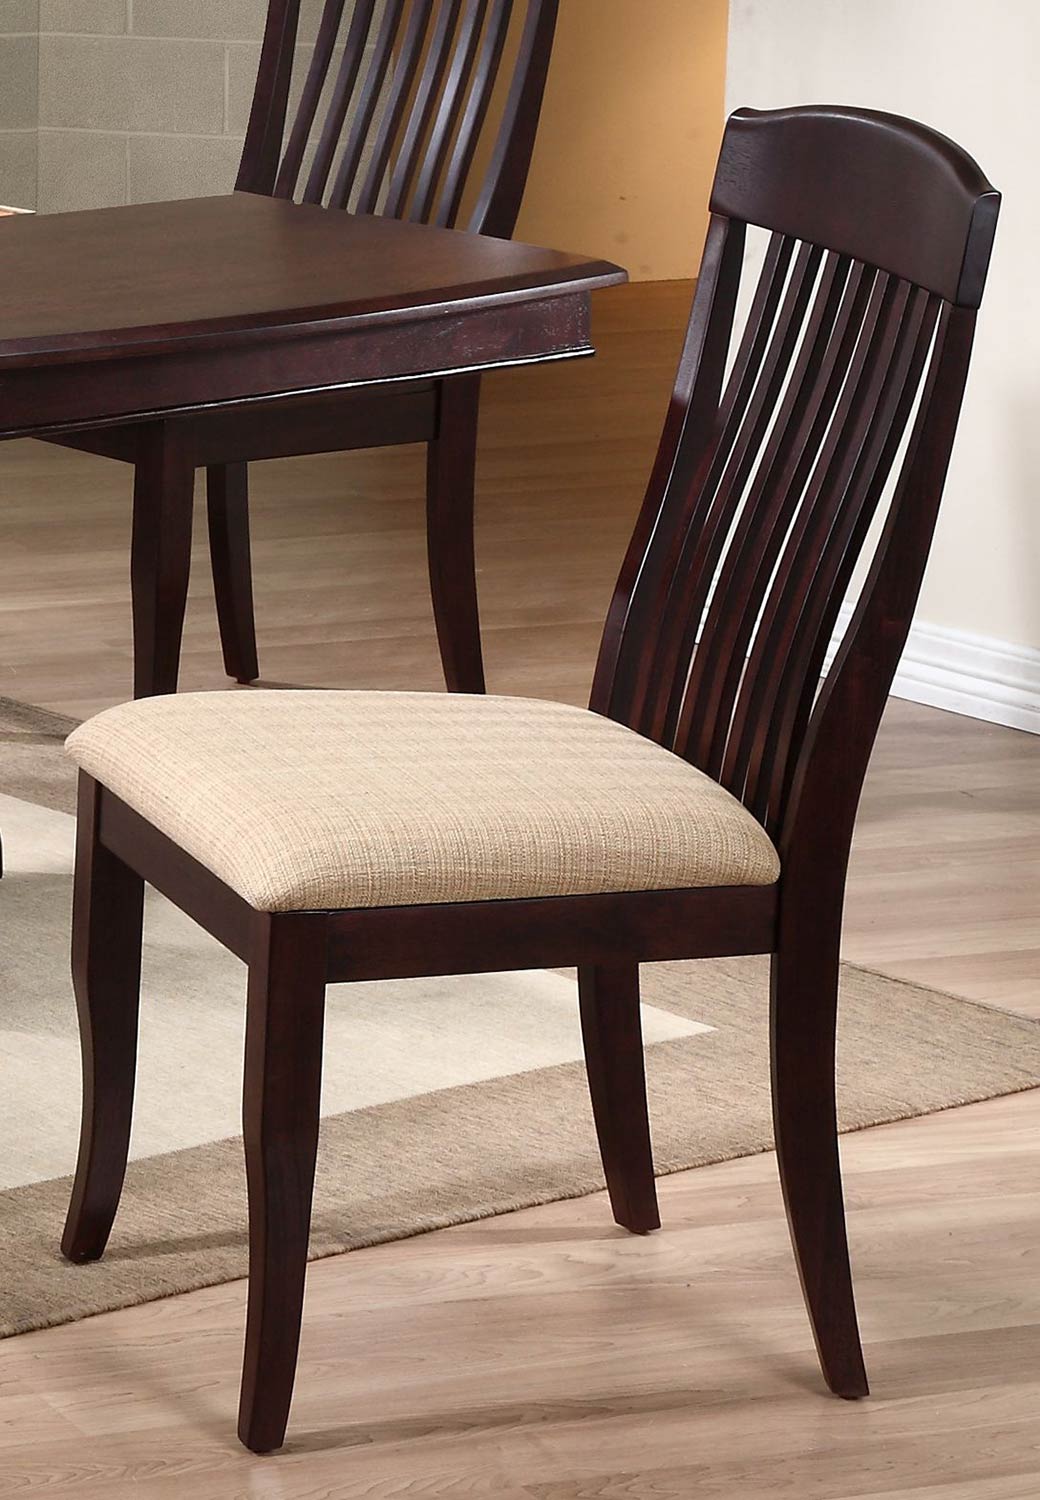 Iconic Furniture Contemporary Slat Back Dining Chair with Upholstered seat - Mocha